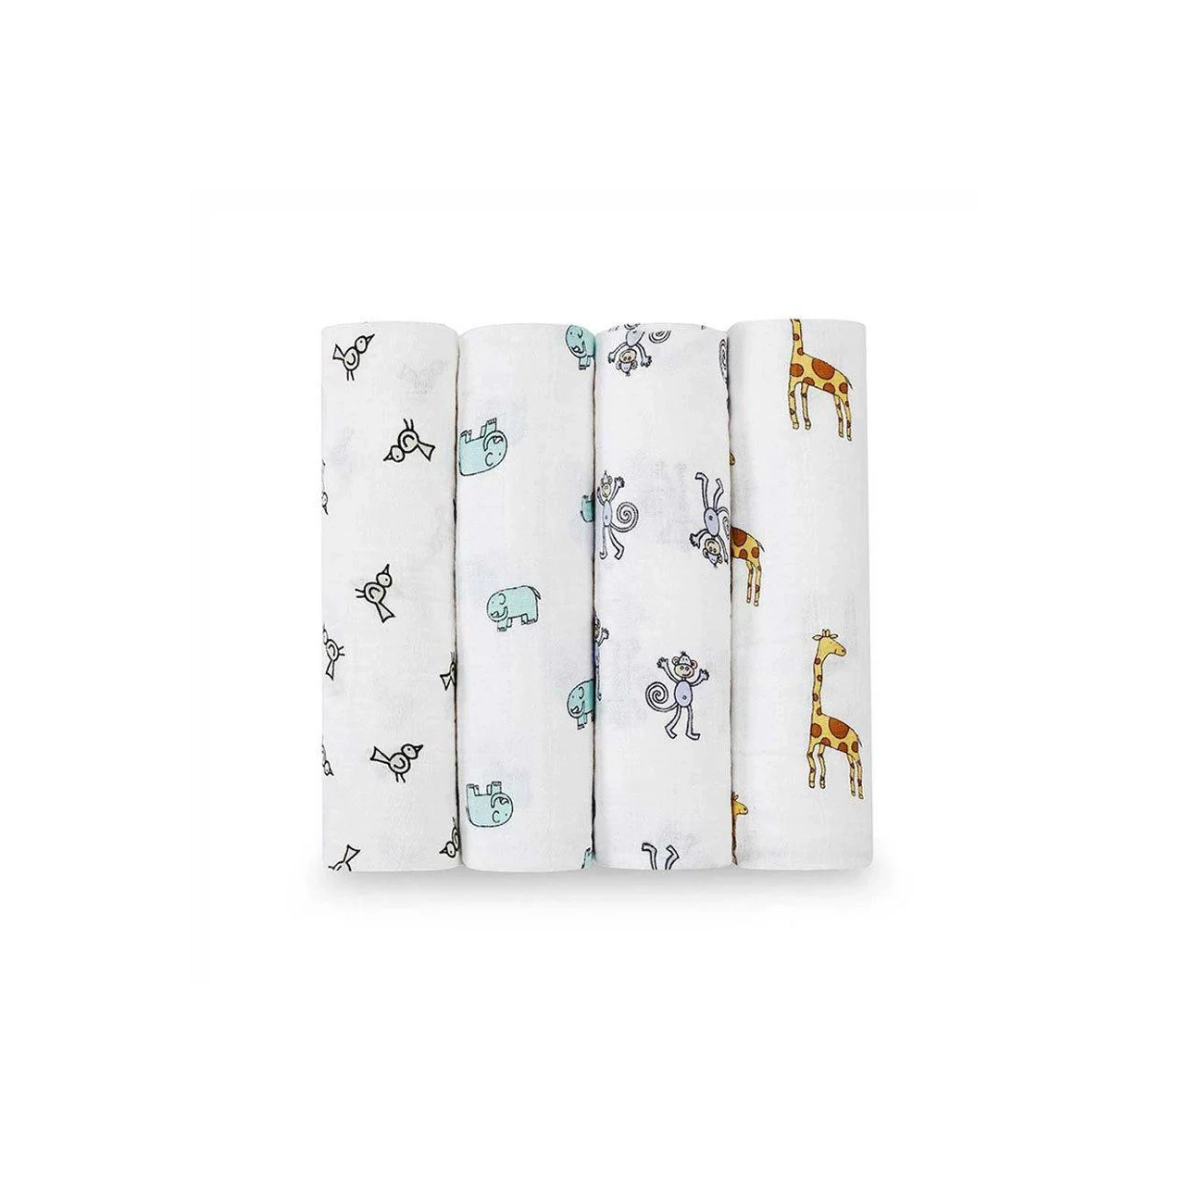 Aden + Anais Pack of 4 Large Swaddle Cotton Muslin